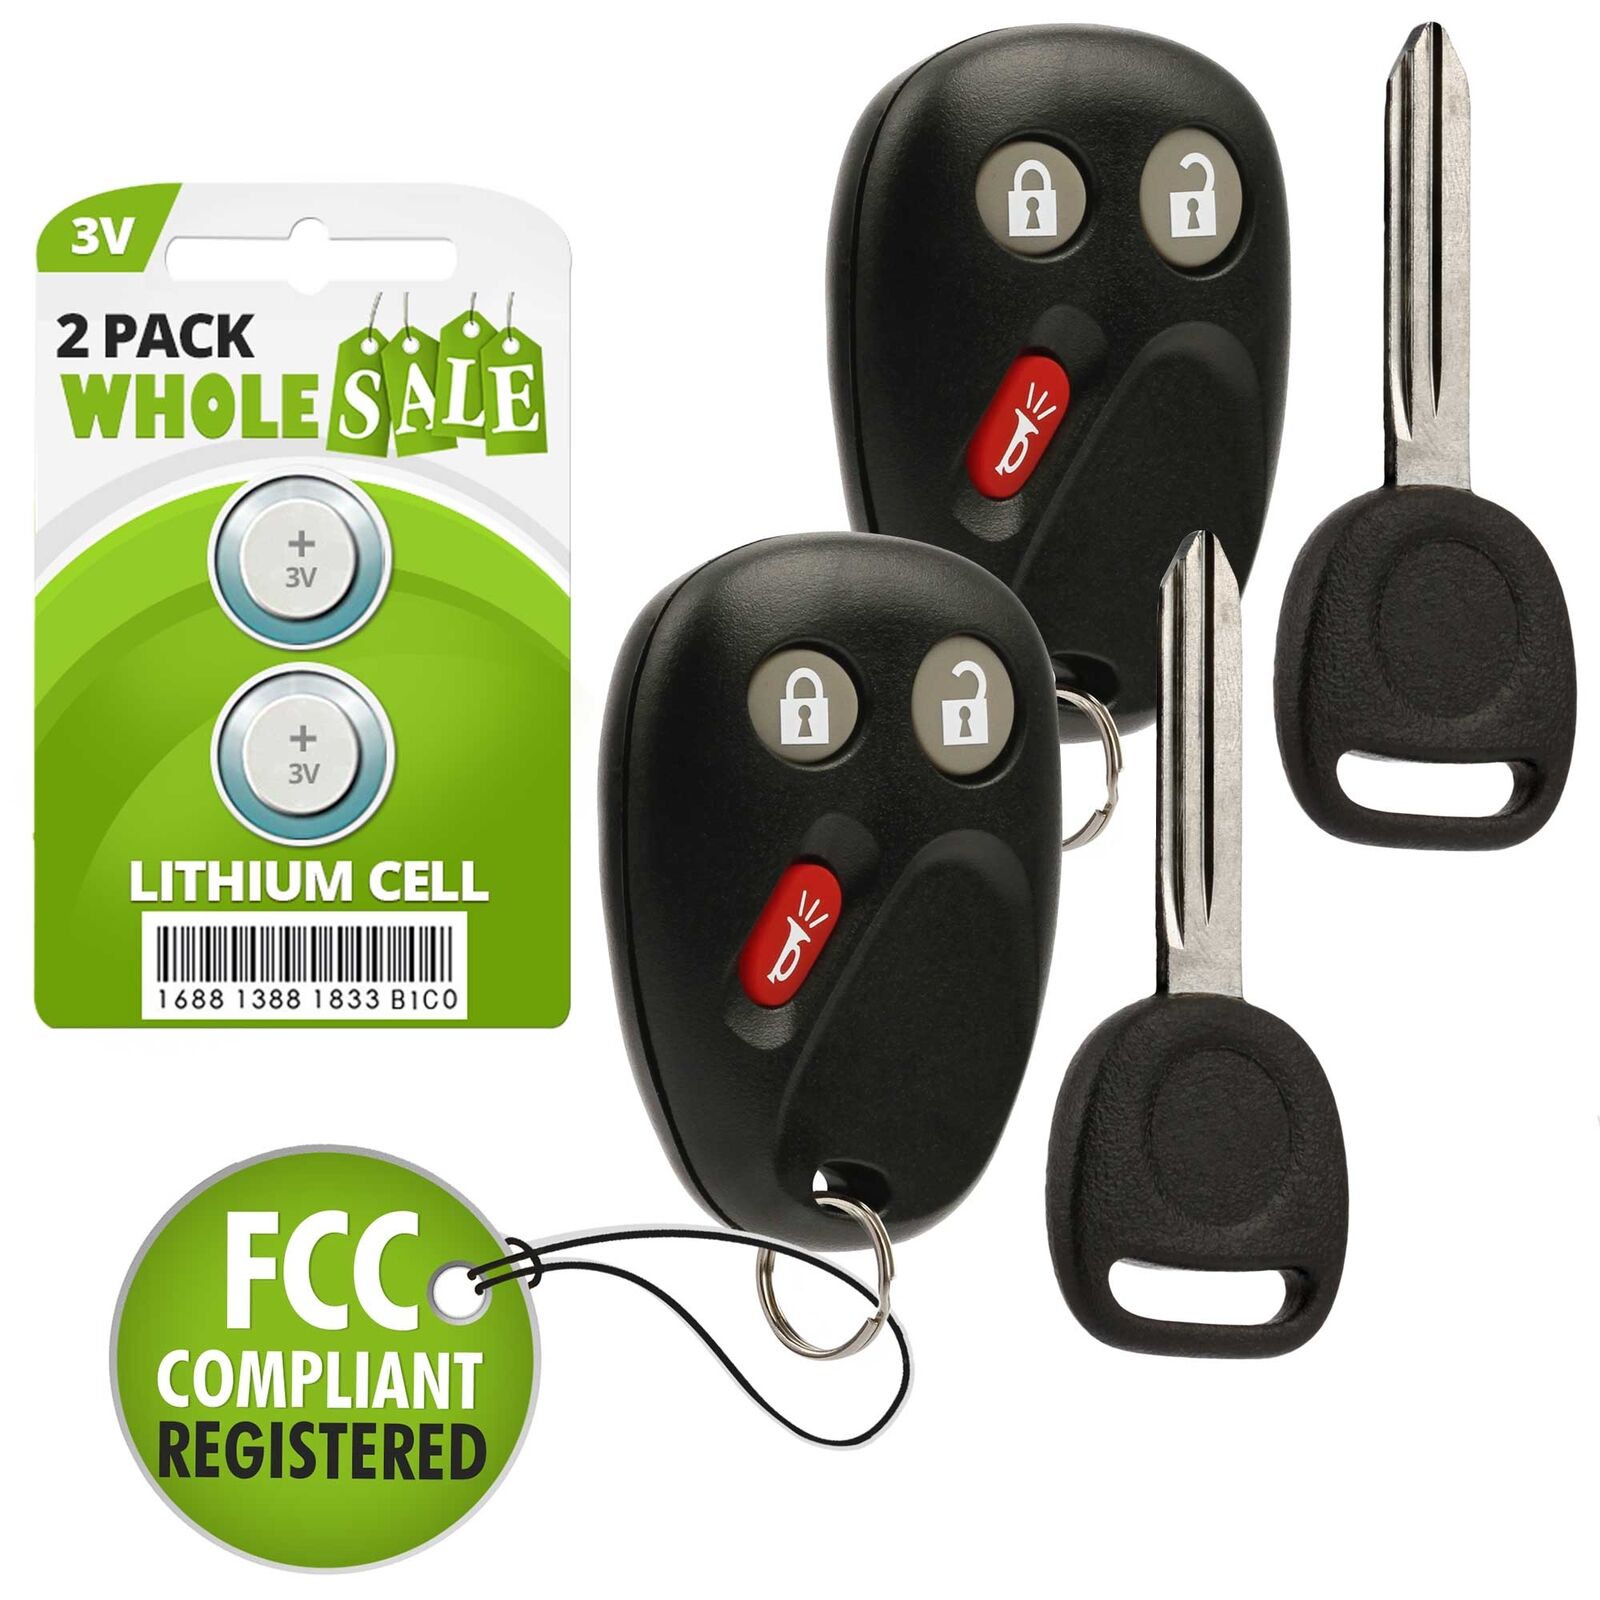 2 Replacement For 2005 2006 Chevrolet Equinox Key + Fob Remote